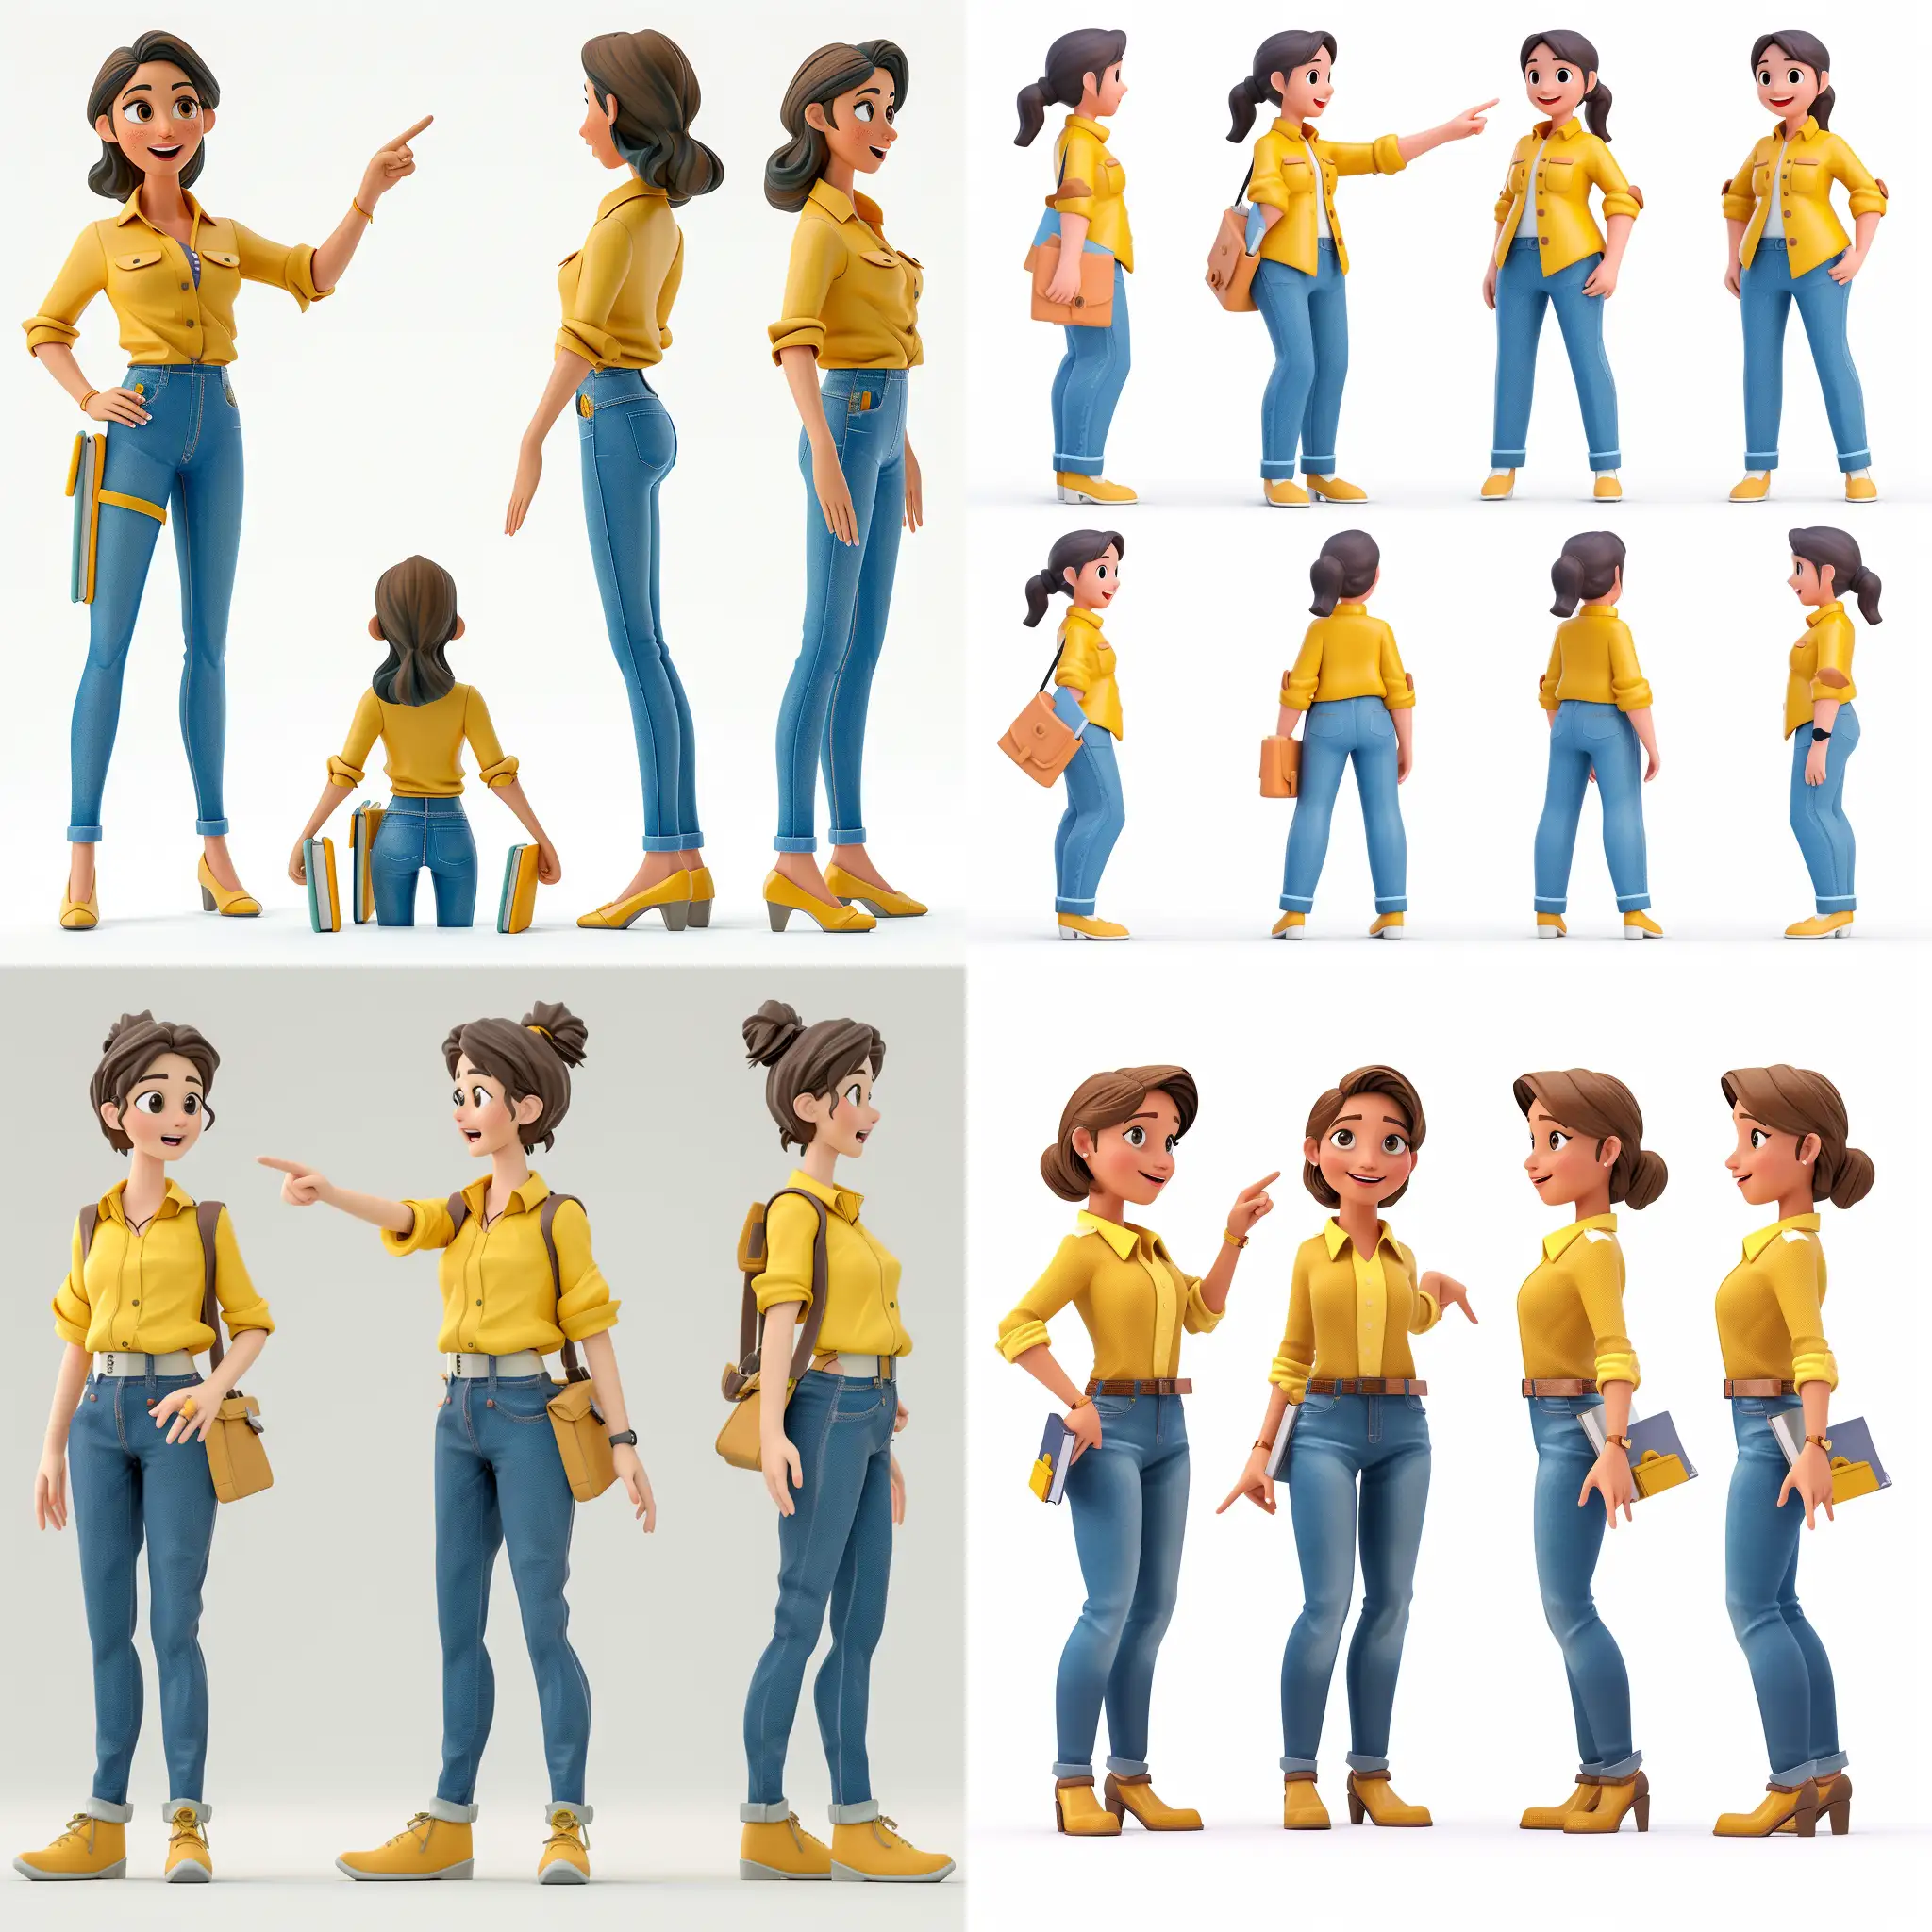 Female teacher 2d characters with full vibrant color, multiple poses and happy expressions, pointing something below, and from multiple angles , 25 year old, yellow shirt and blue jeans dresses pent, no books in hand, no bag, same yellow shirt and blue jeans clothes, full vibrant color, dynamic and vivid characters, no outline